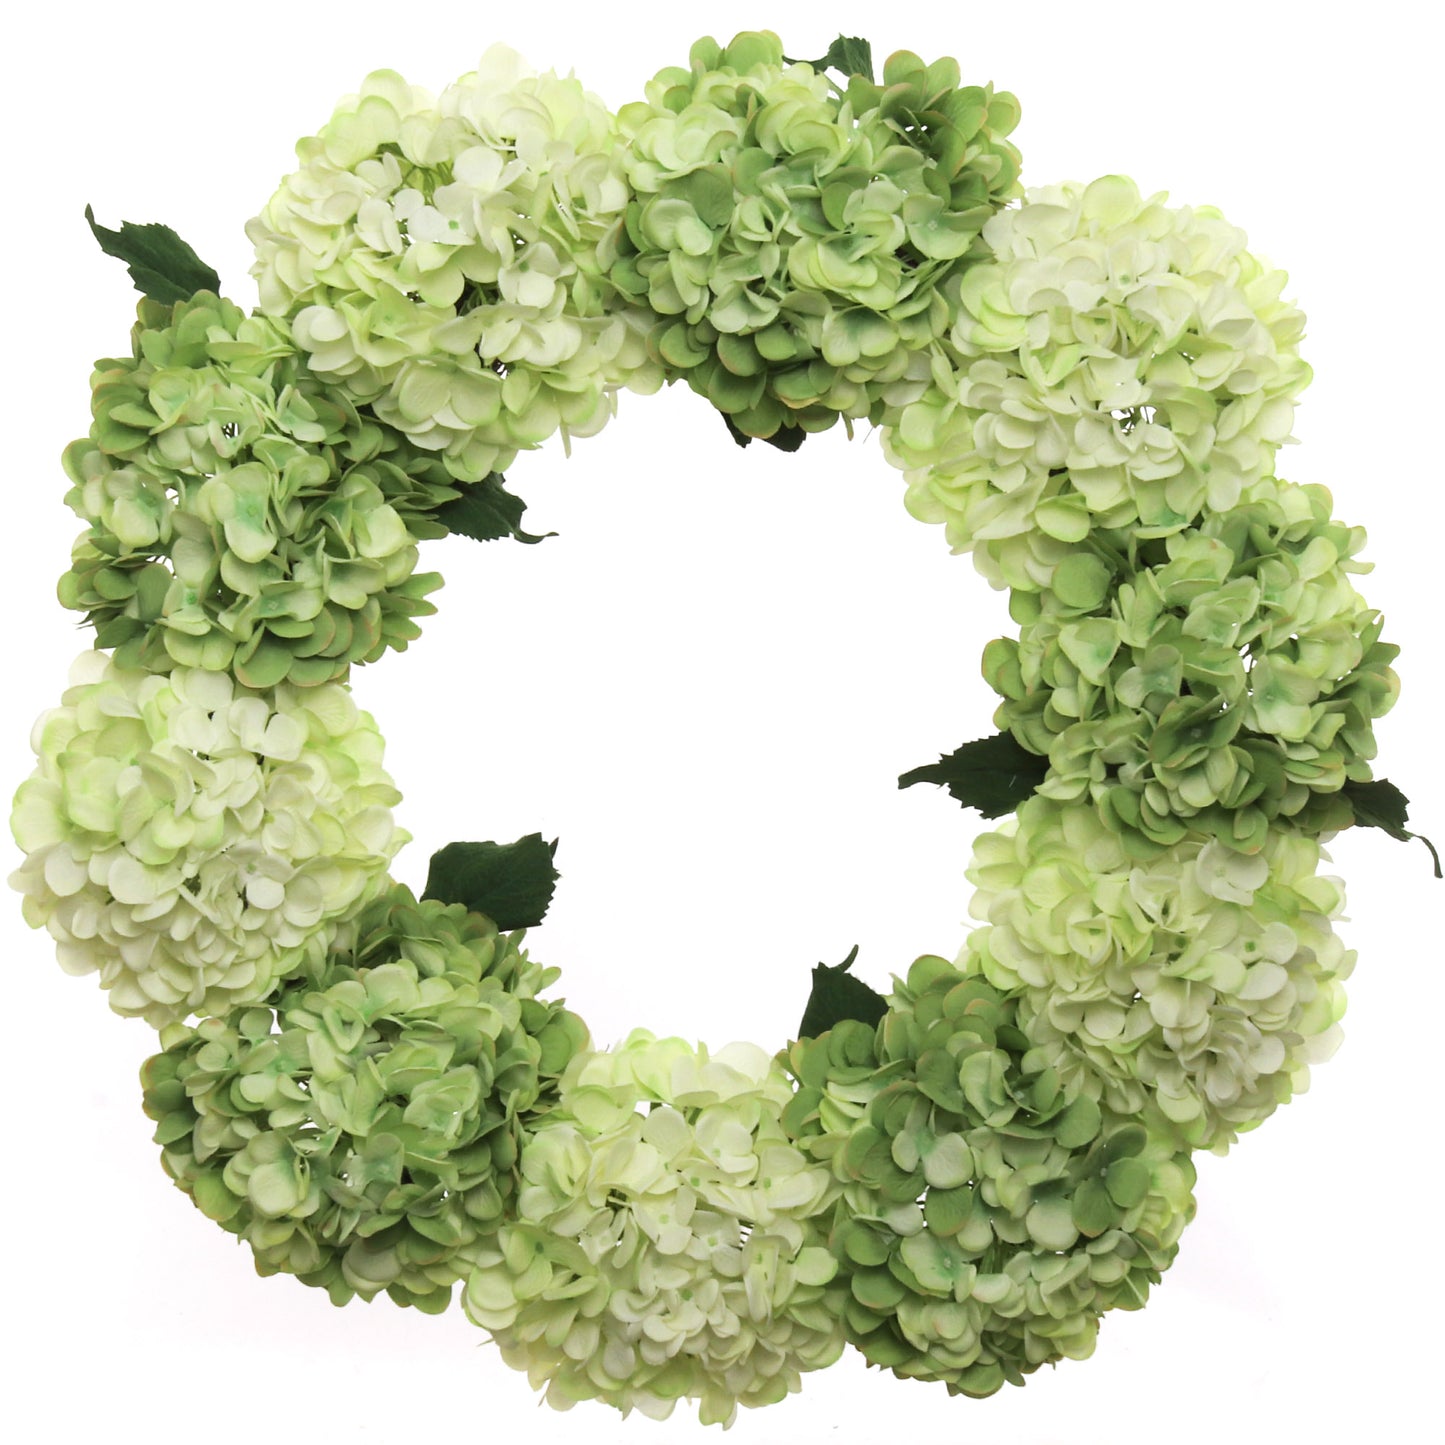 Artificial 24" Mint Green Hydrangea Wreath - Handcrafted, UV Resistant, All-Season, Indoor/Outdoor Decor, Perfect for Home, Wedding, Event